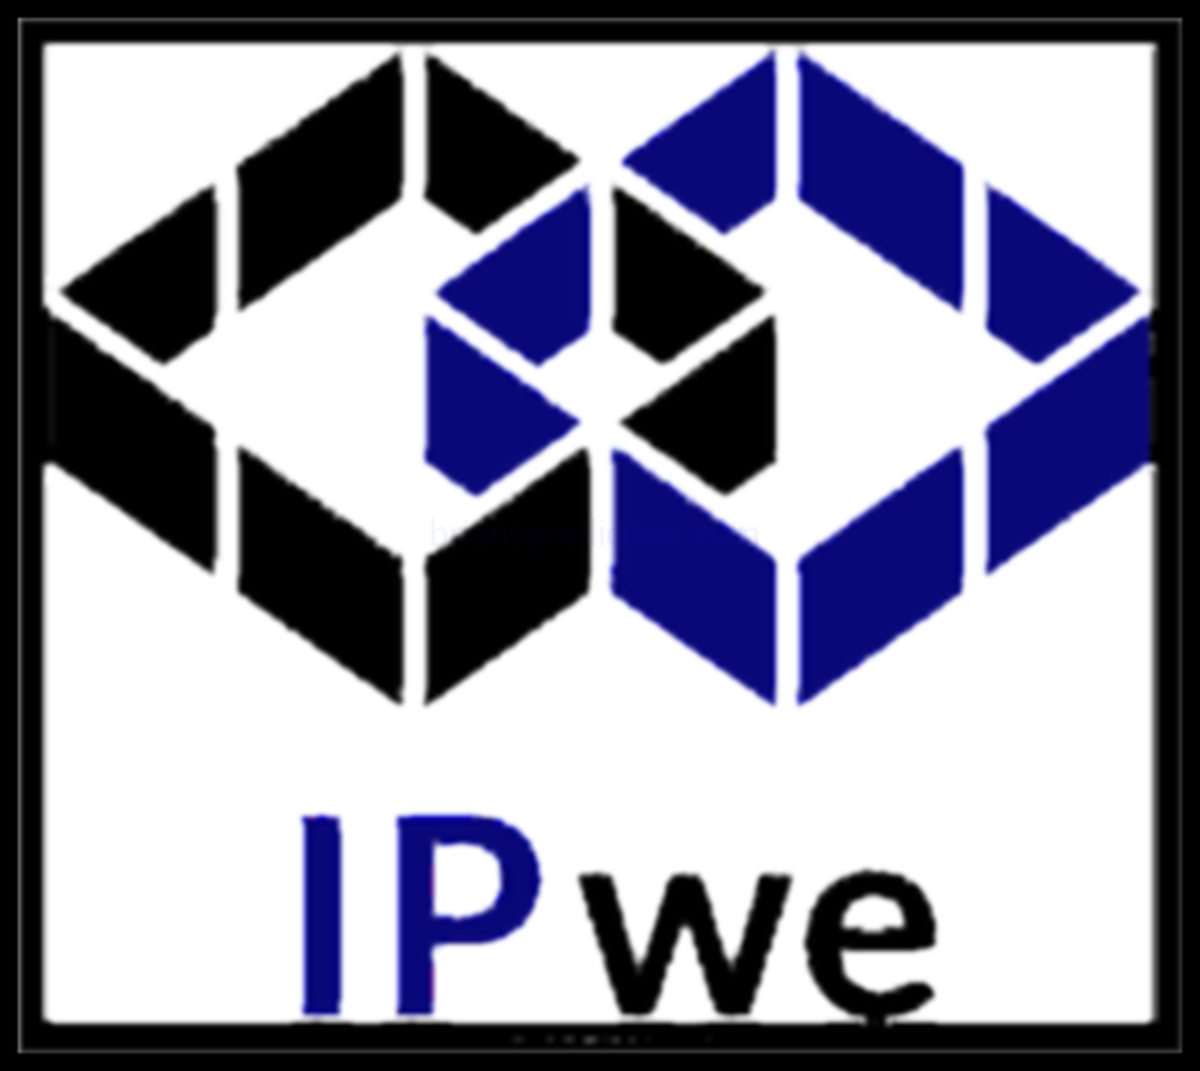 Logo IPwe 1 Matthew George Whitaker and World Patent Marketing Inc secrets you have got to see before they are pulled from the web Logo IPwe 1    psychic Brian Ladd
Logo IPwe 1 Matthew George Whitaker and World Patent Marketing Inc secrets you have got to see before they are pulled from the web Logo IPwe 1    psychic Brian Ladd
